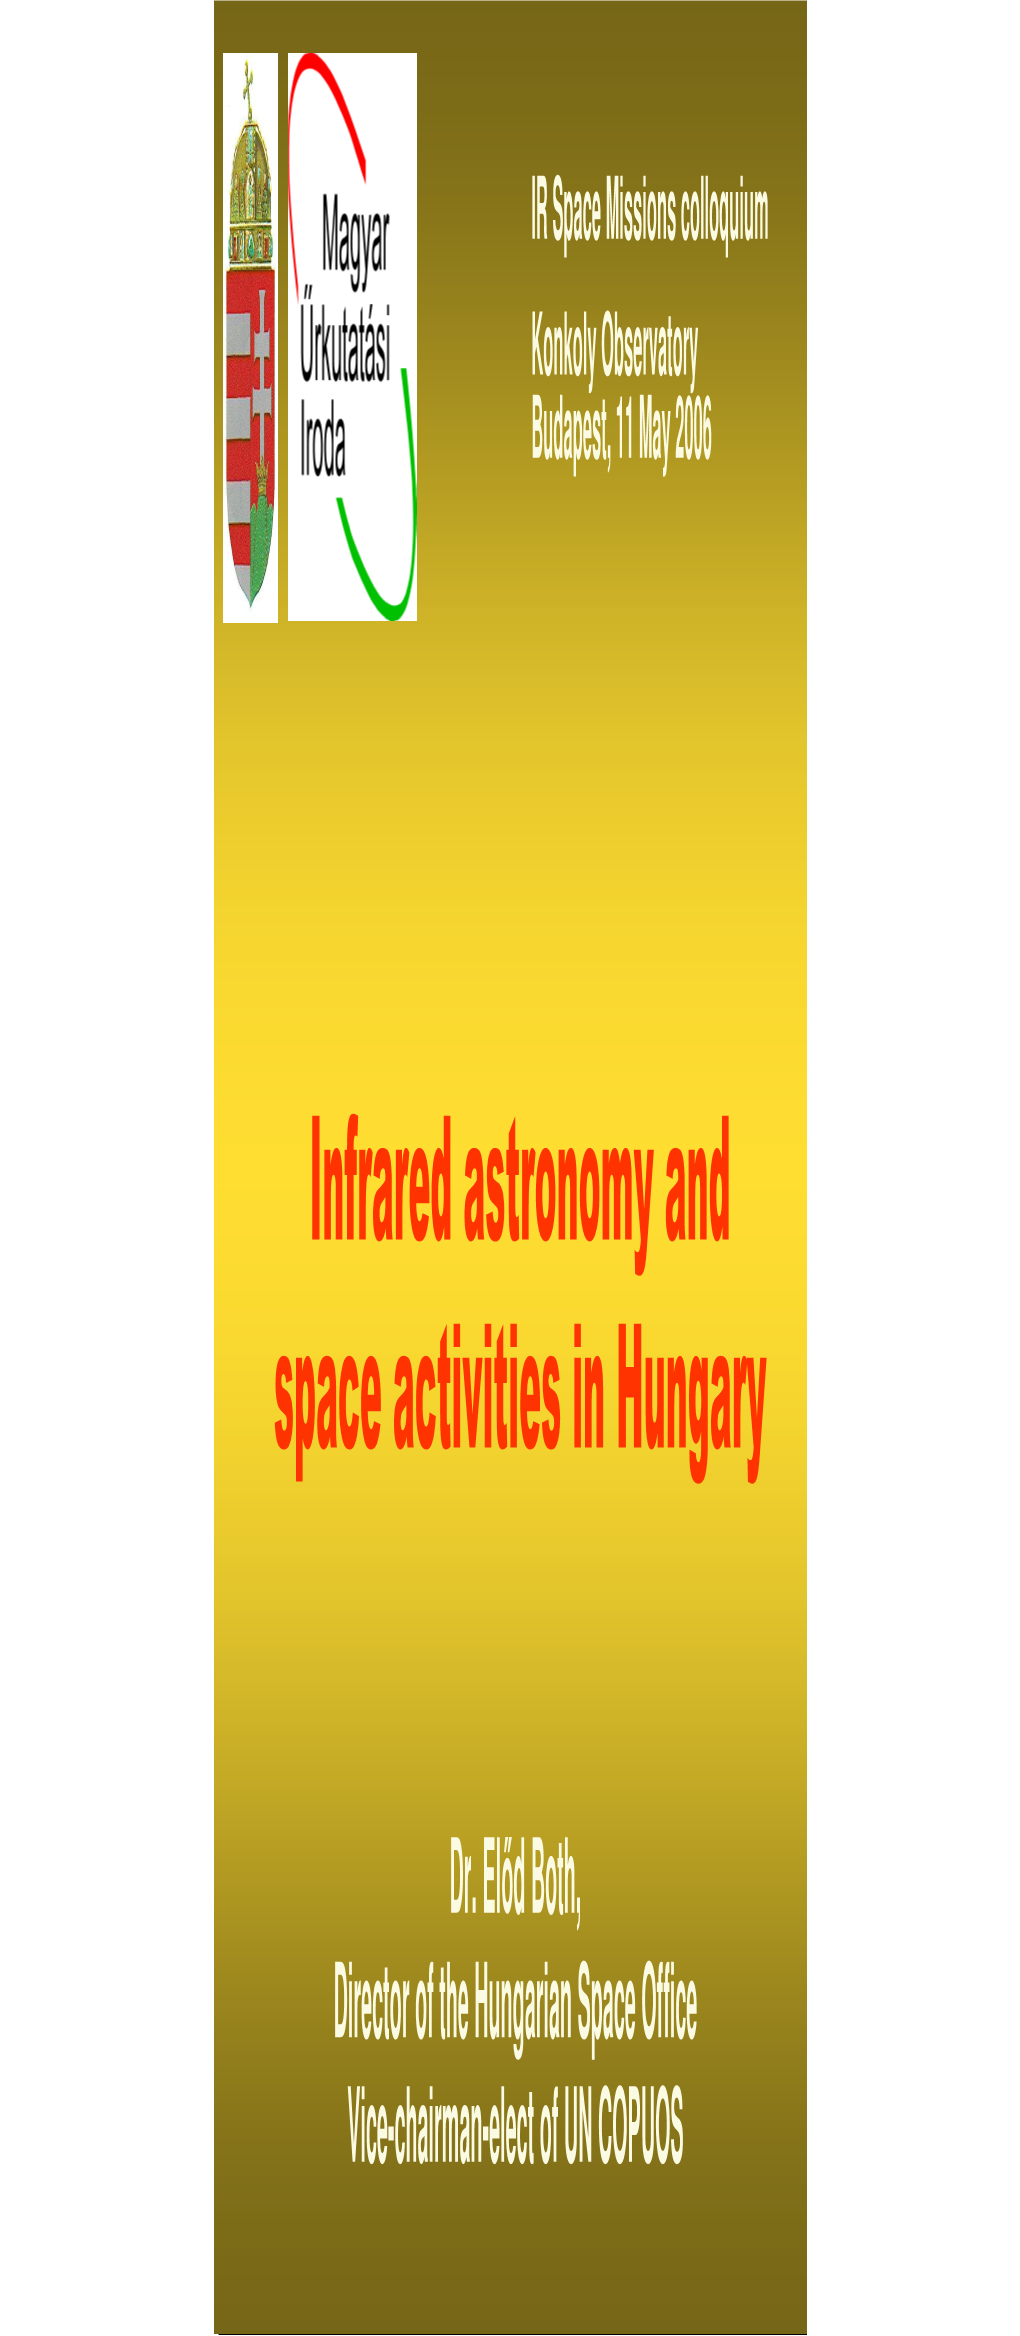 Infrared Astronomy and Space Activities in Hungary